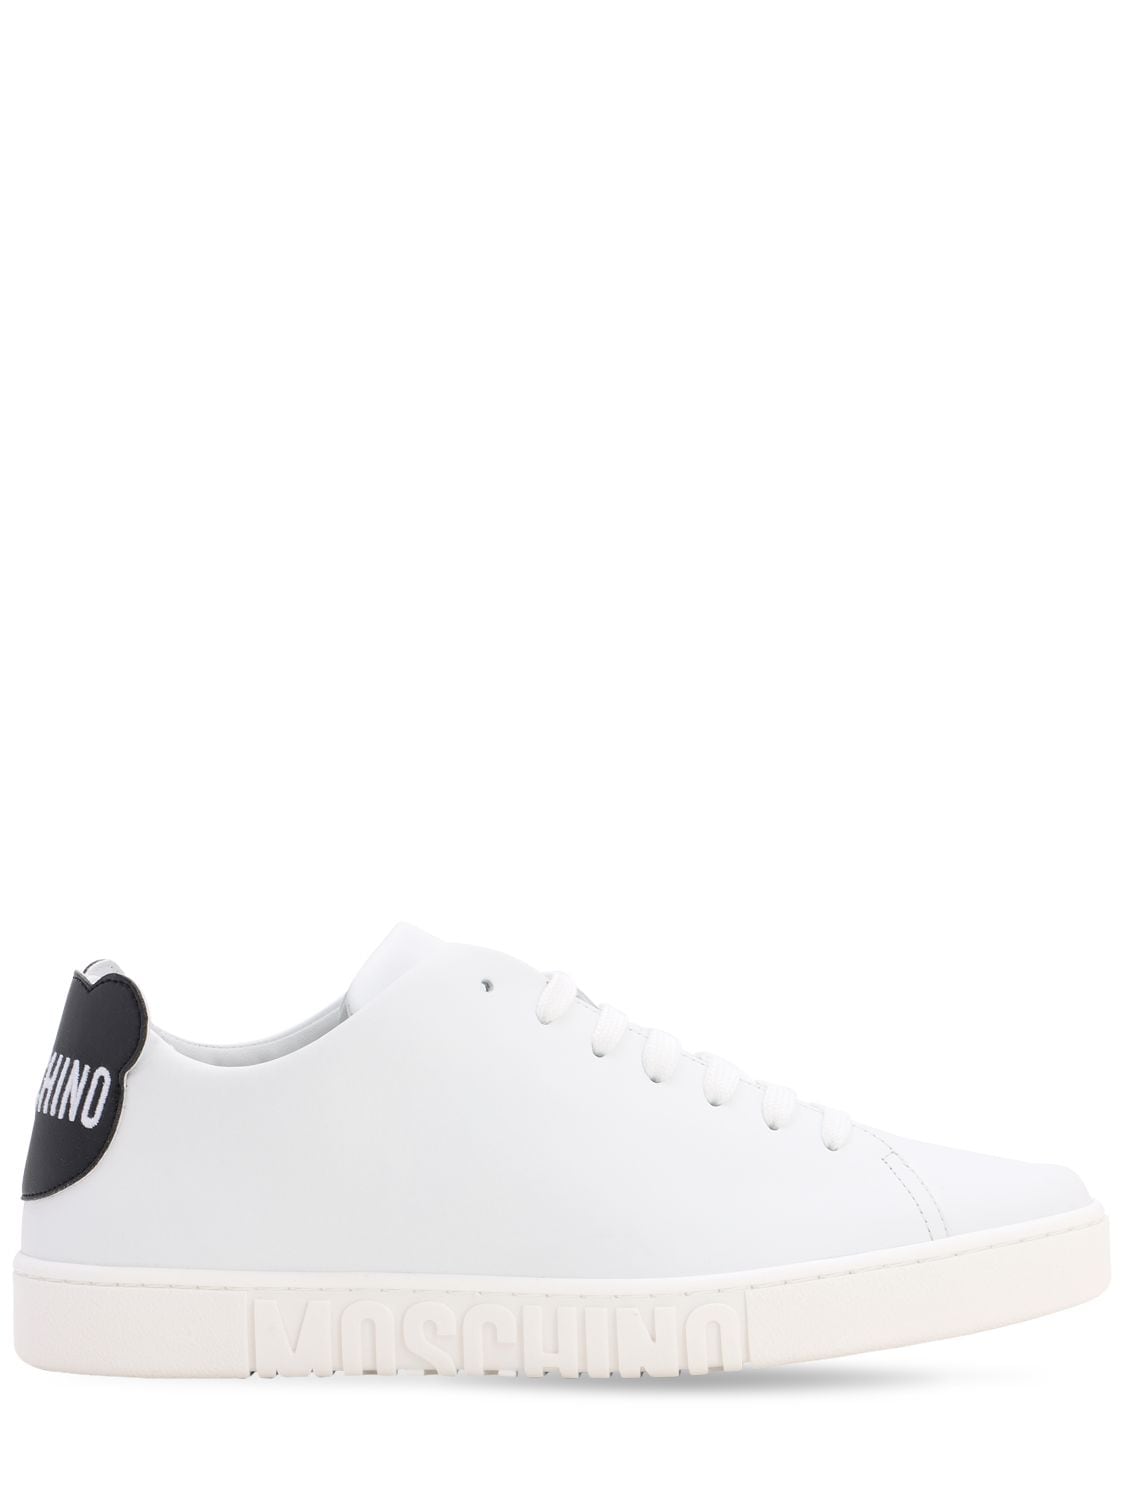 Moschino Men's Shoes Leather Trainers 